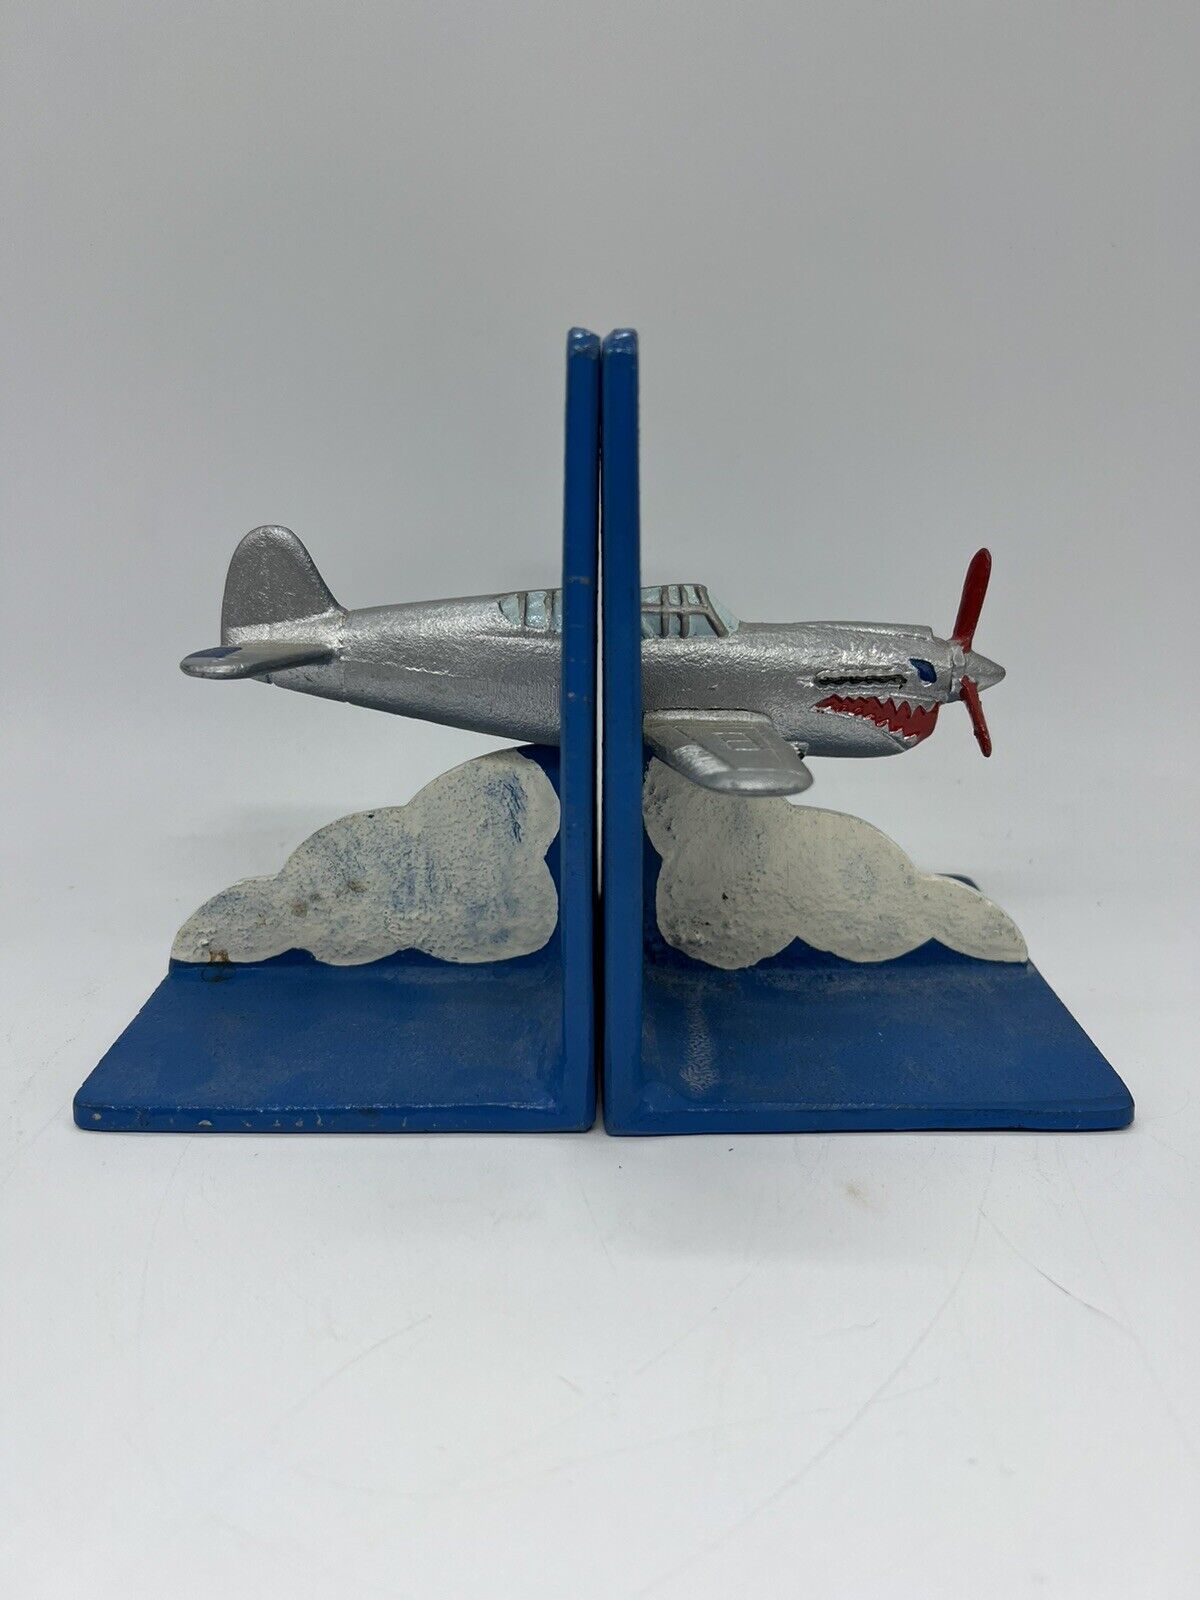 Vintage Airplane Bookends Cast Iron P-59 P-40 Ww2 Aviation Fighter Retro